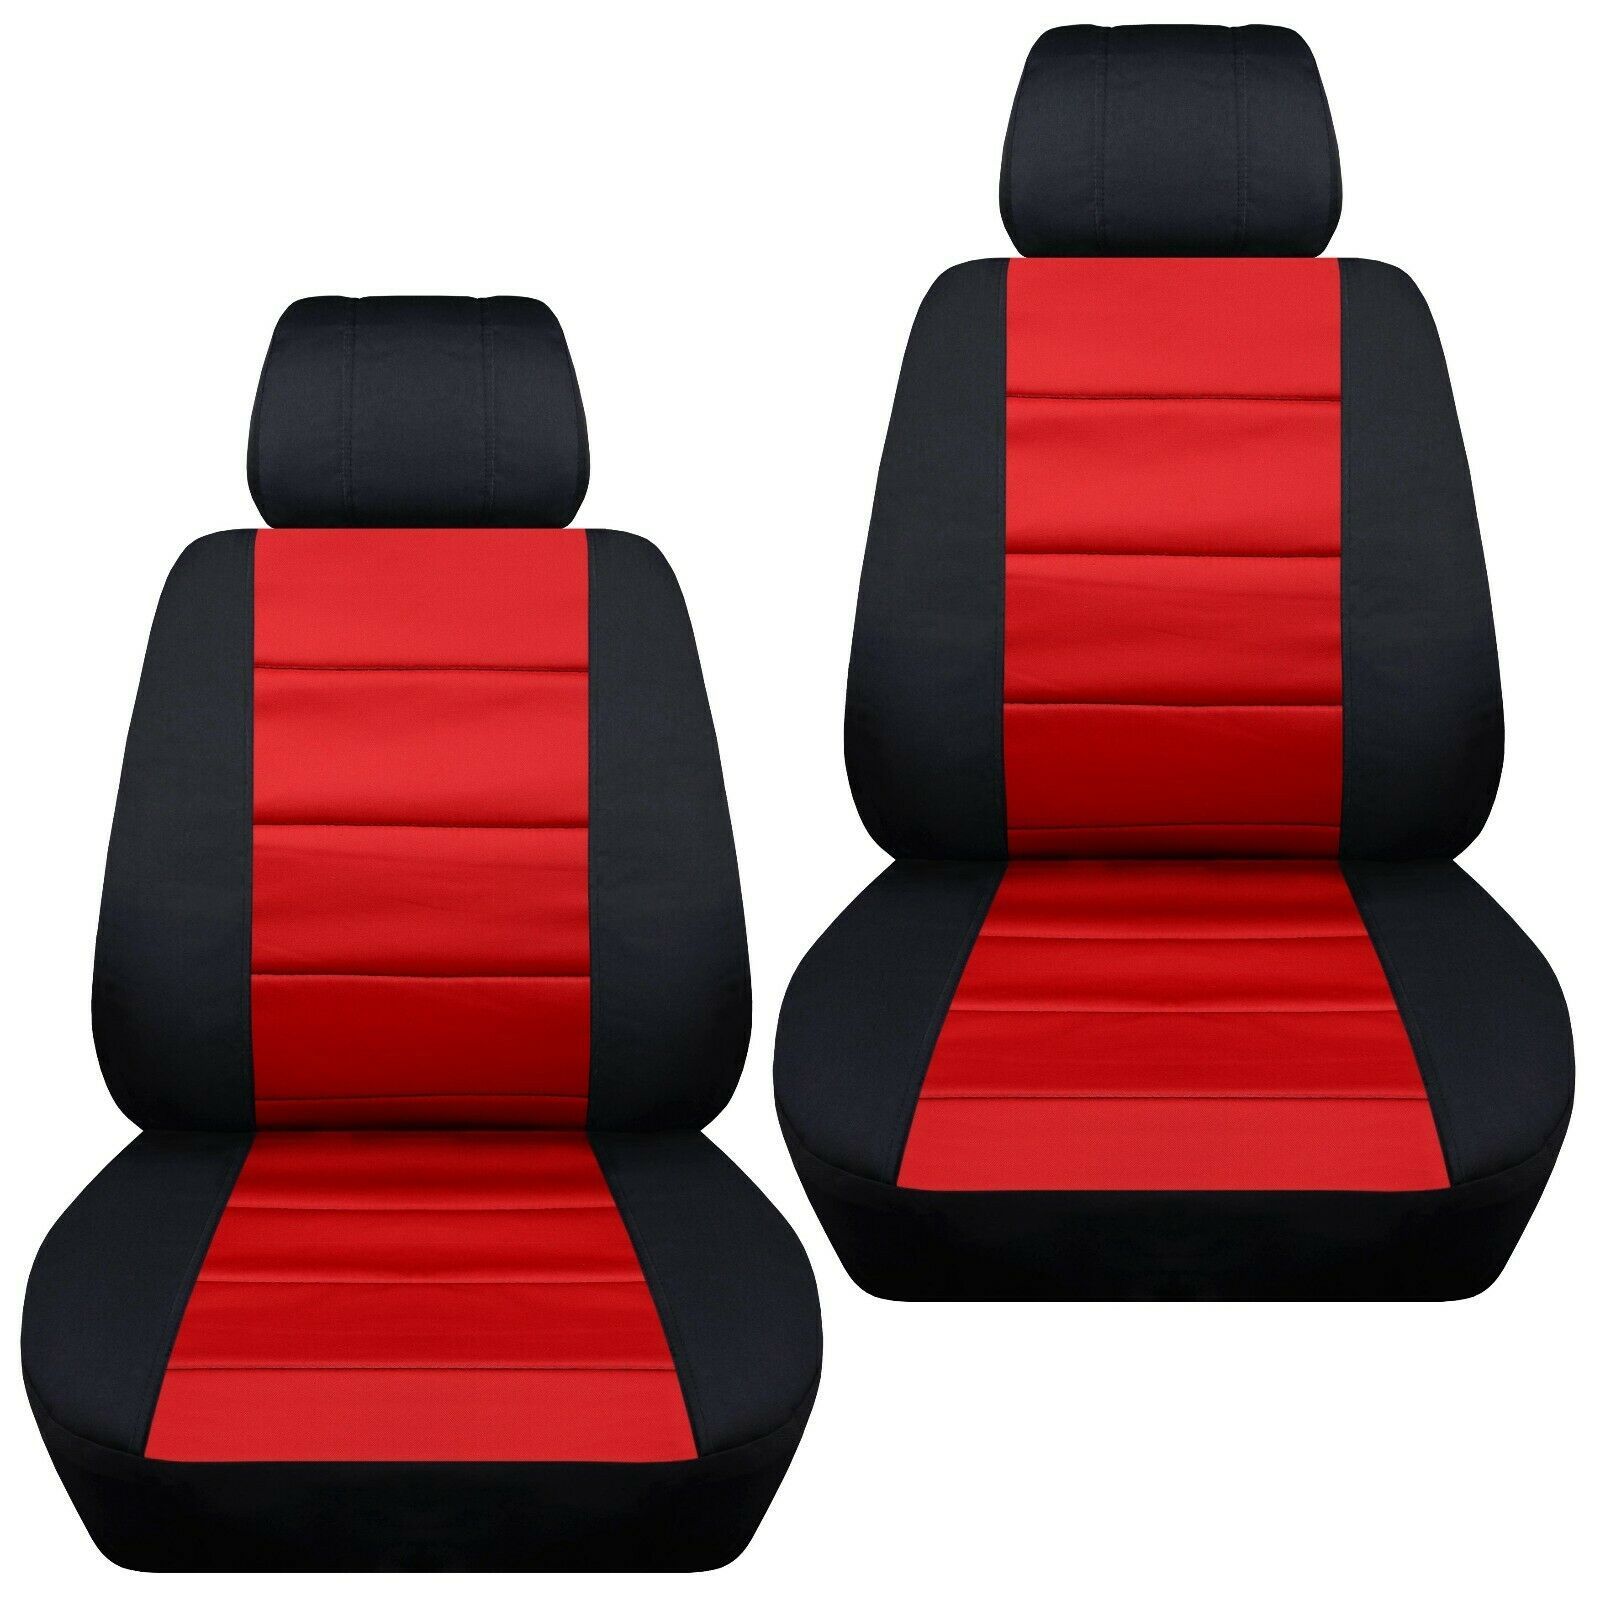 Primary image for Fits Honda Civic Front Seat Cover 1996-2020 Black Red Cotton